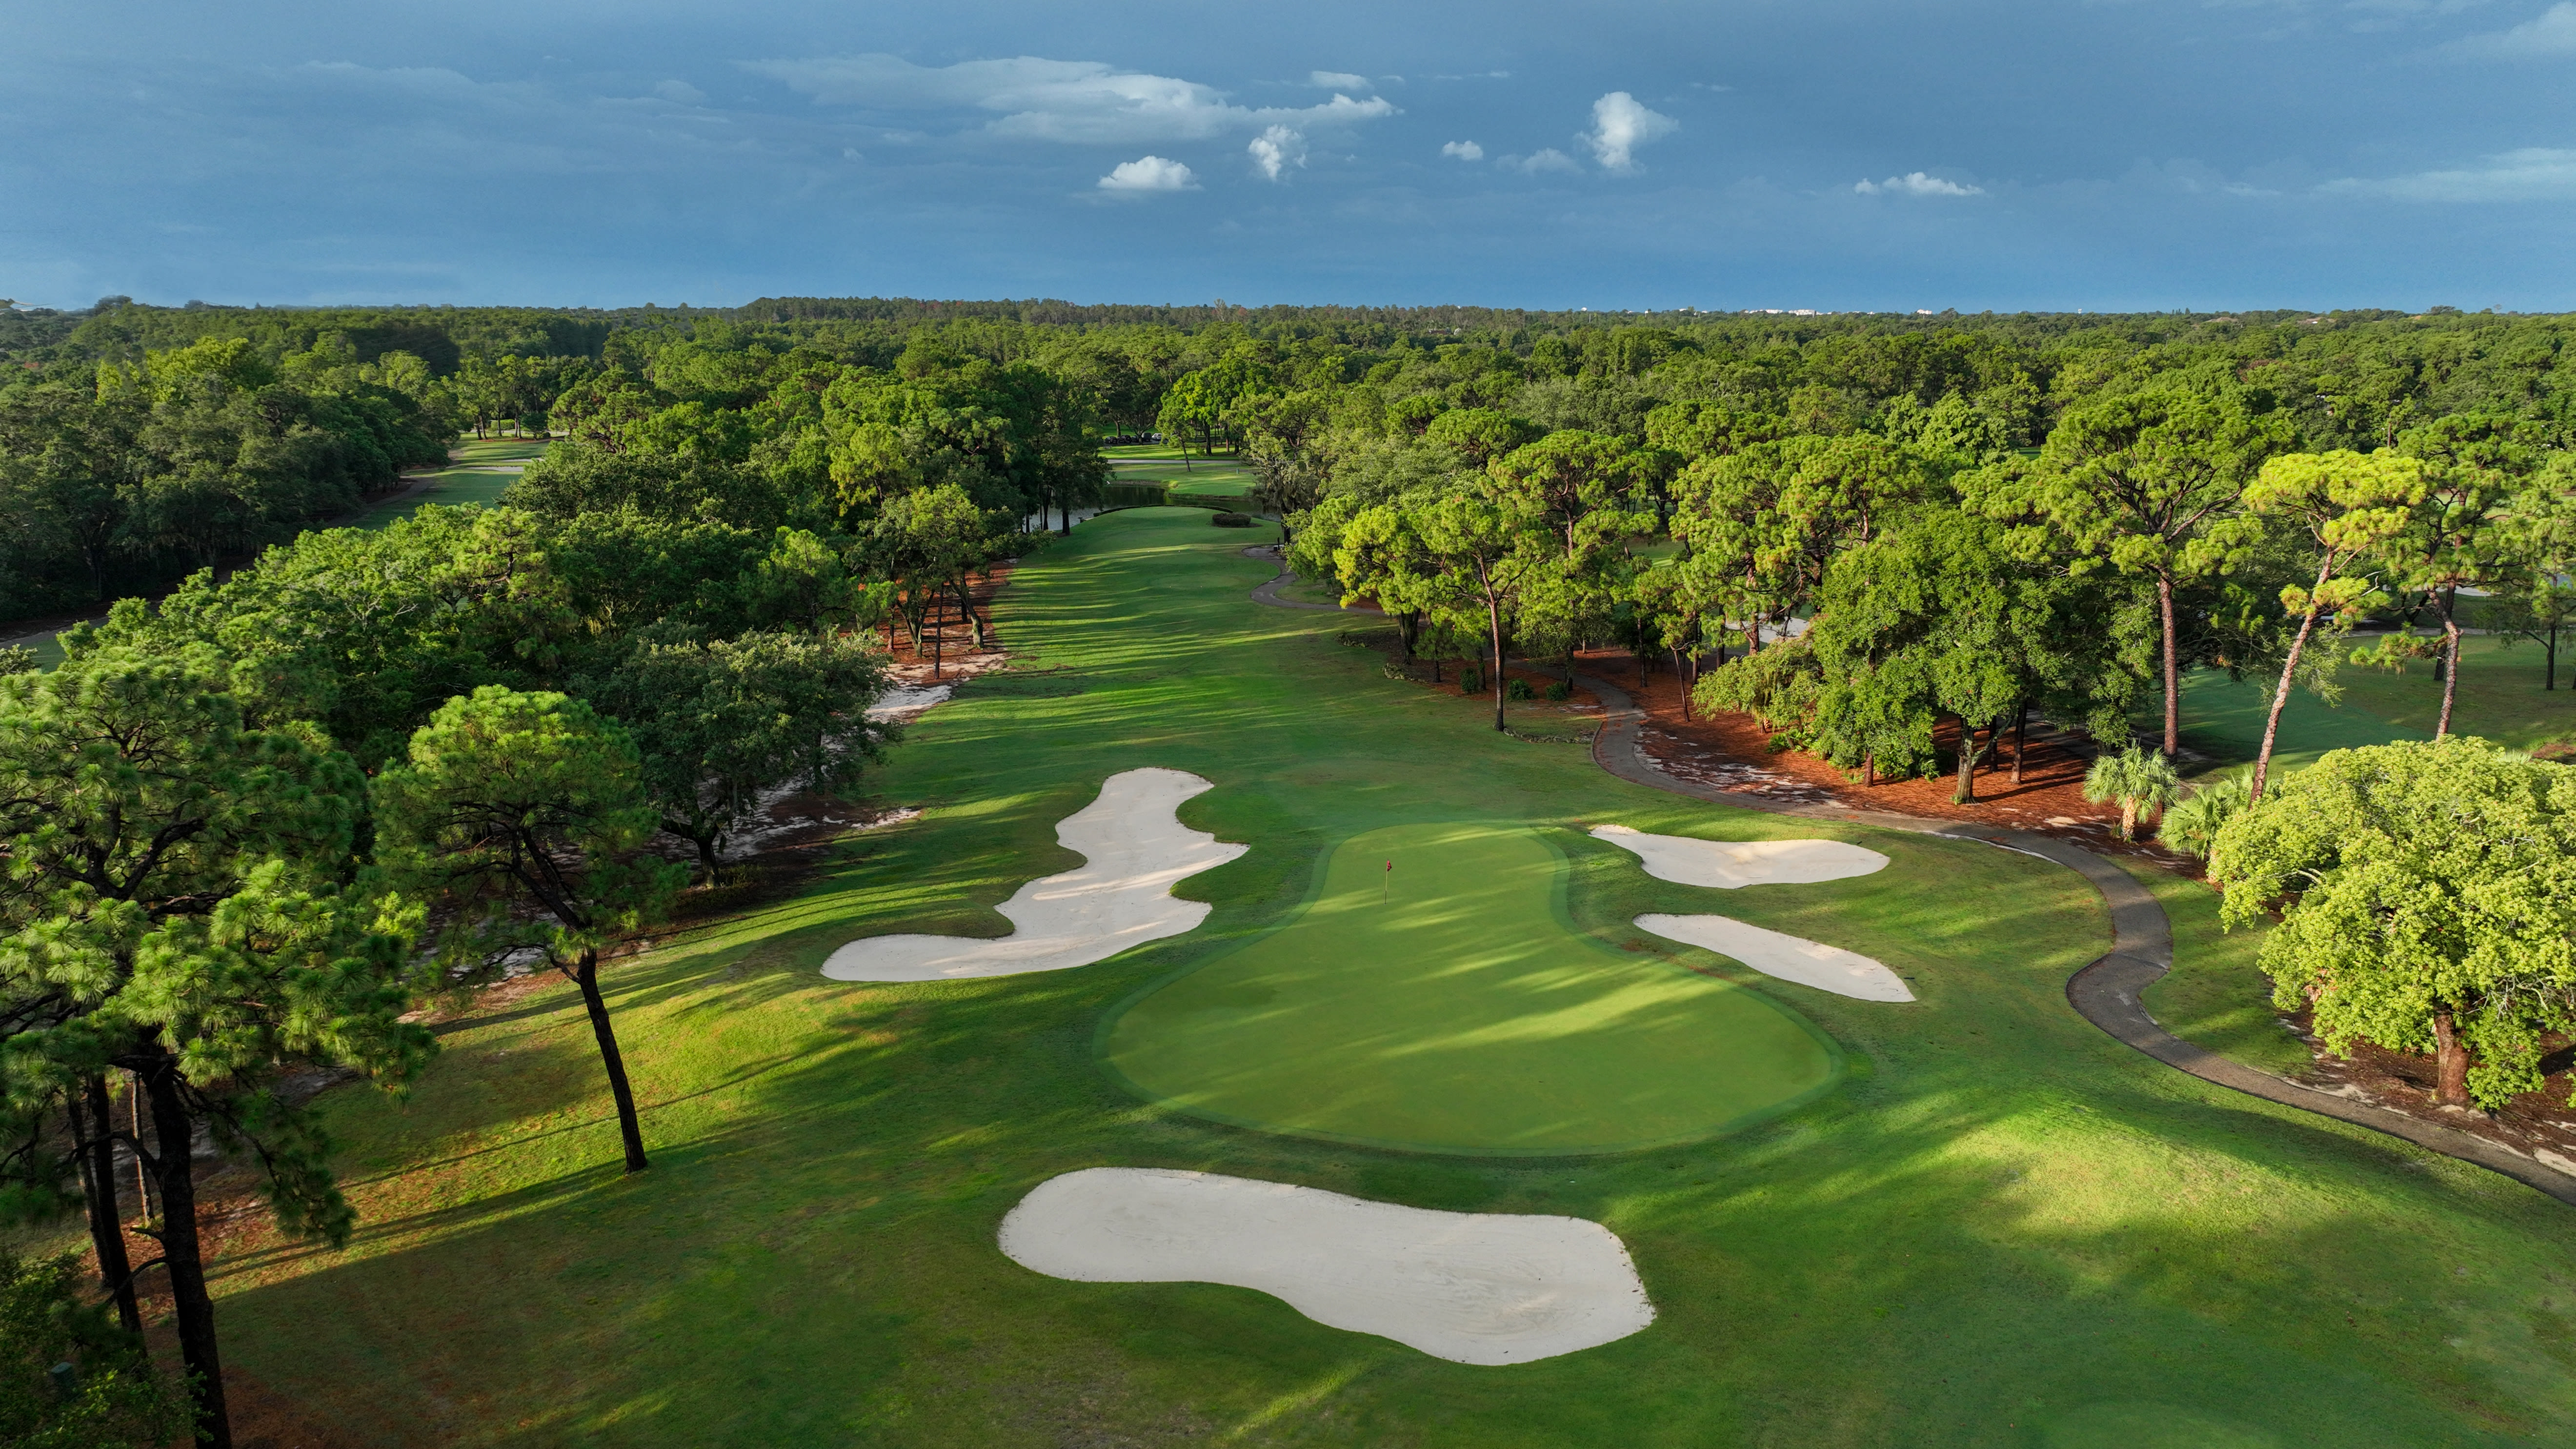 The Copperhead Course is the crown jewel of Innisbrook.